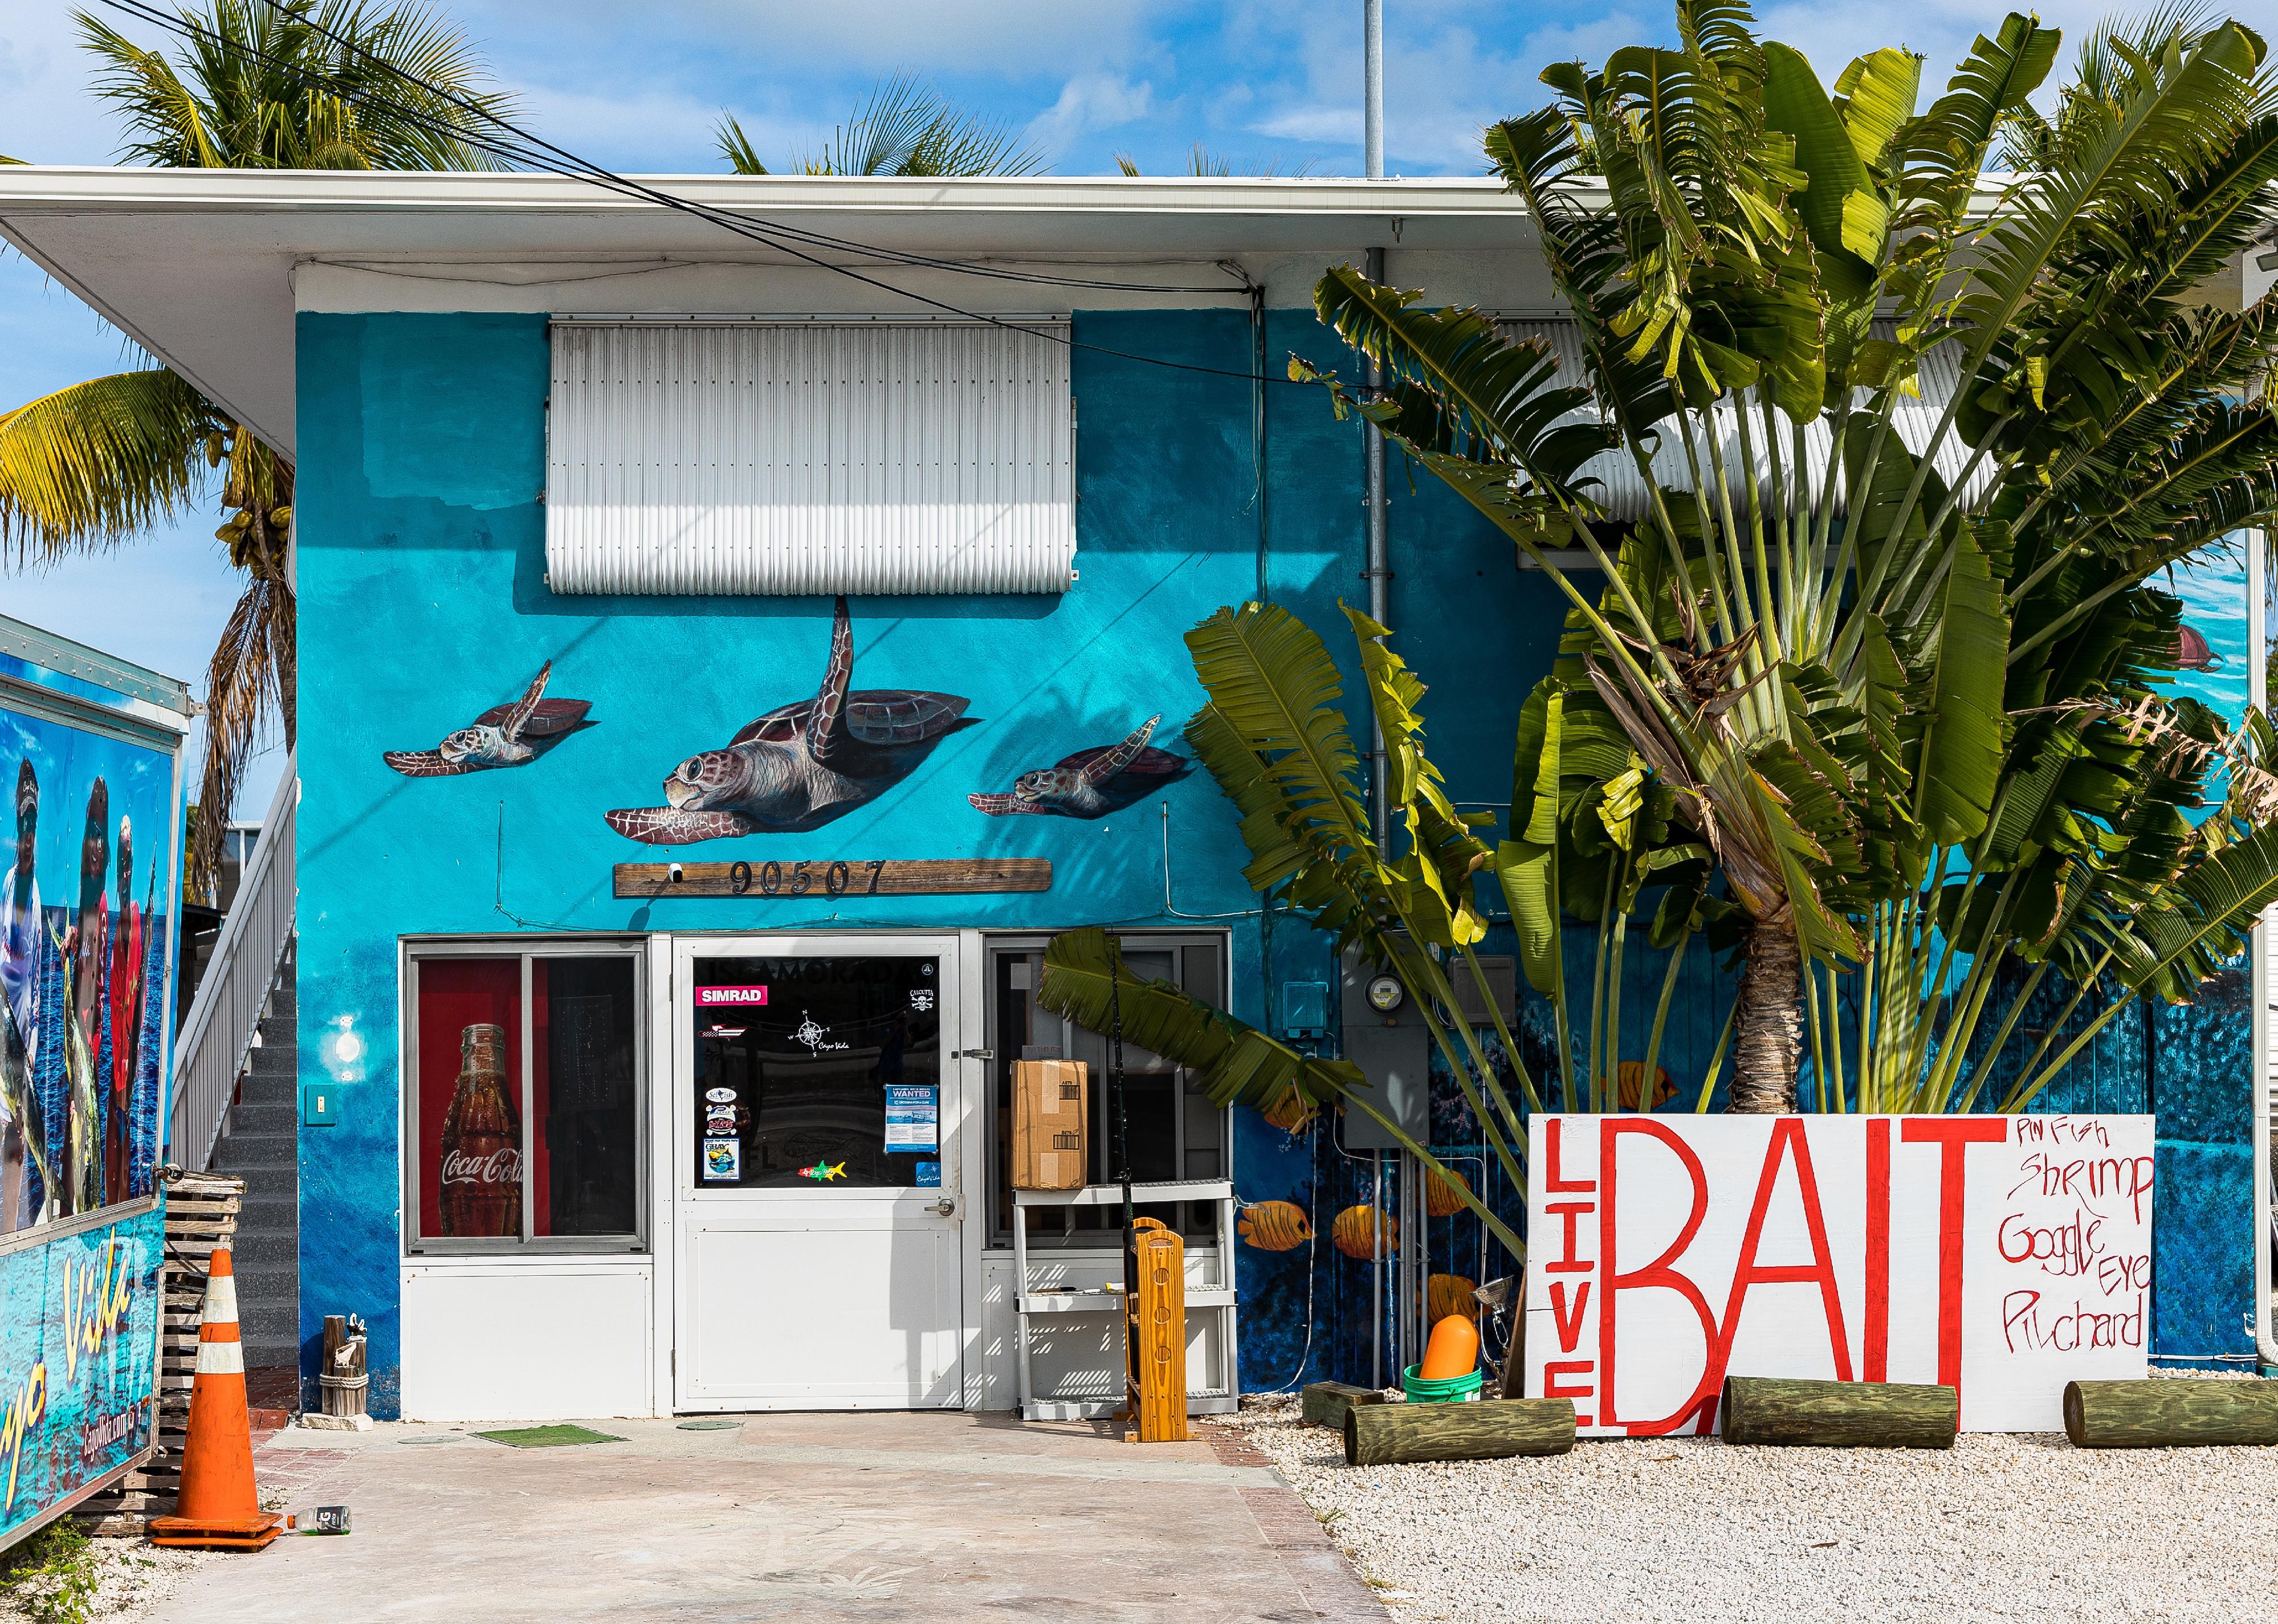 Small bait shop in Florida.